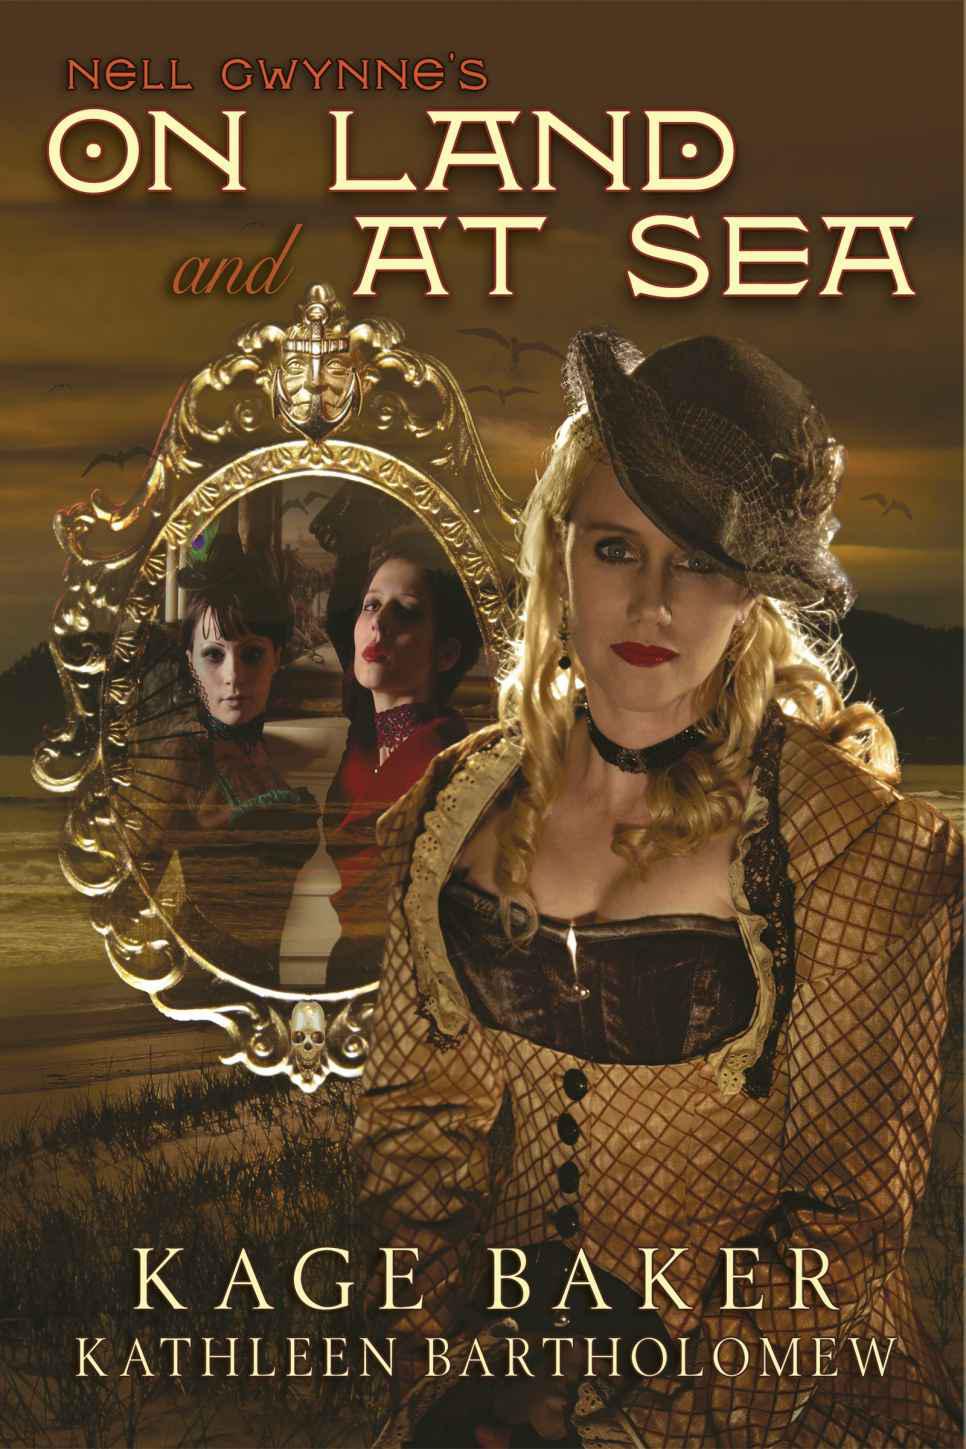 Nell Gwynne's On Land and At Sea by Kage Baker